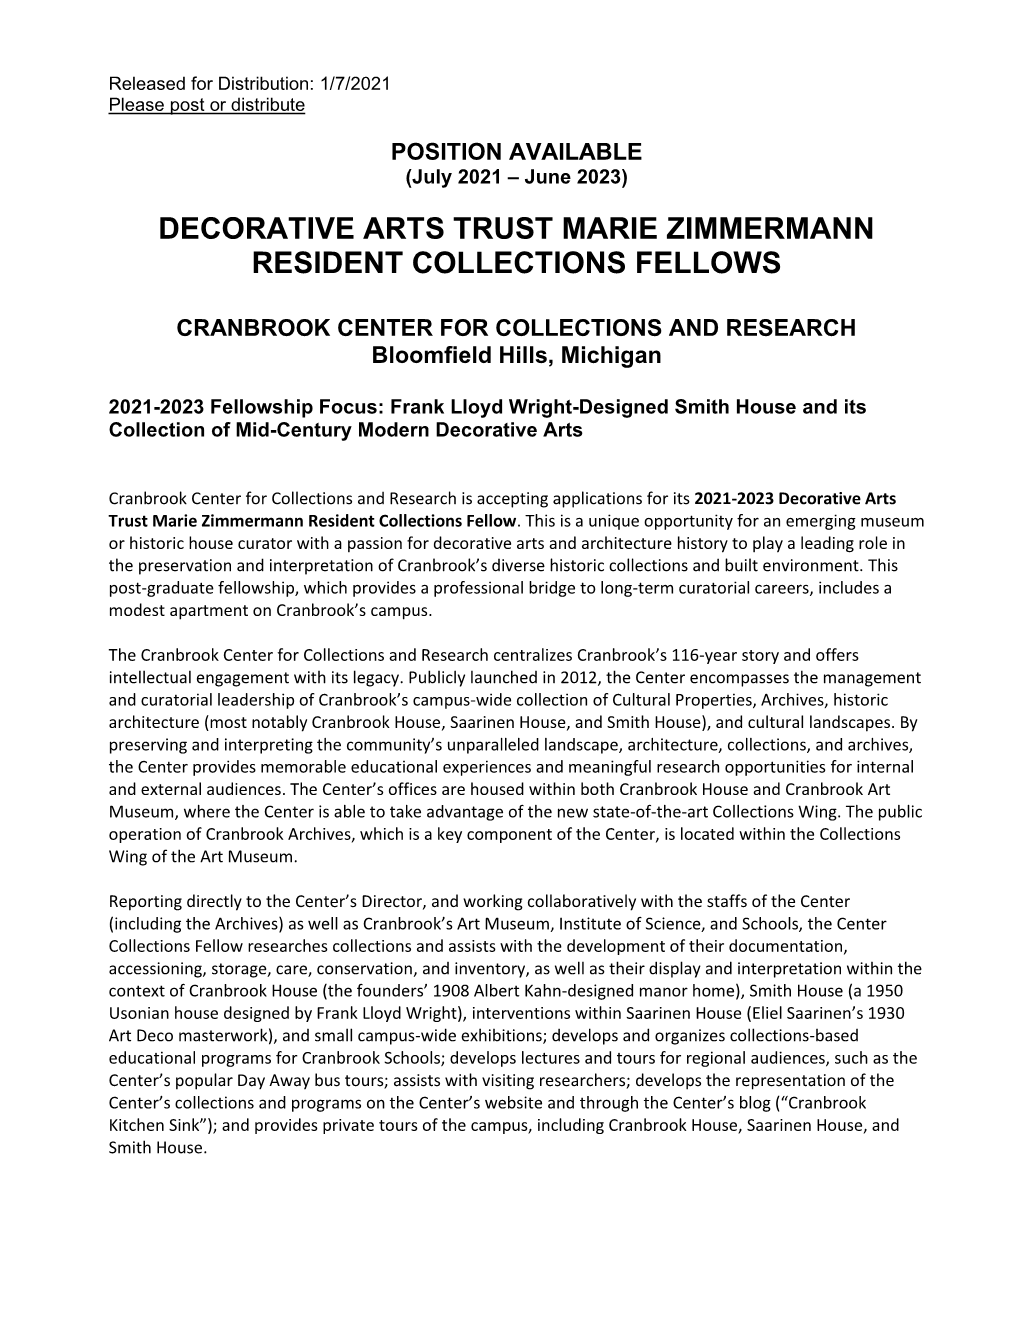 Center Collections Fellow Flyer (DAT FY22-FY23) (003).Pdf